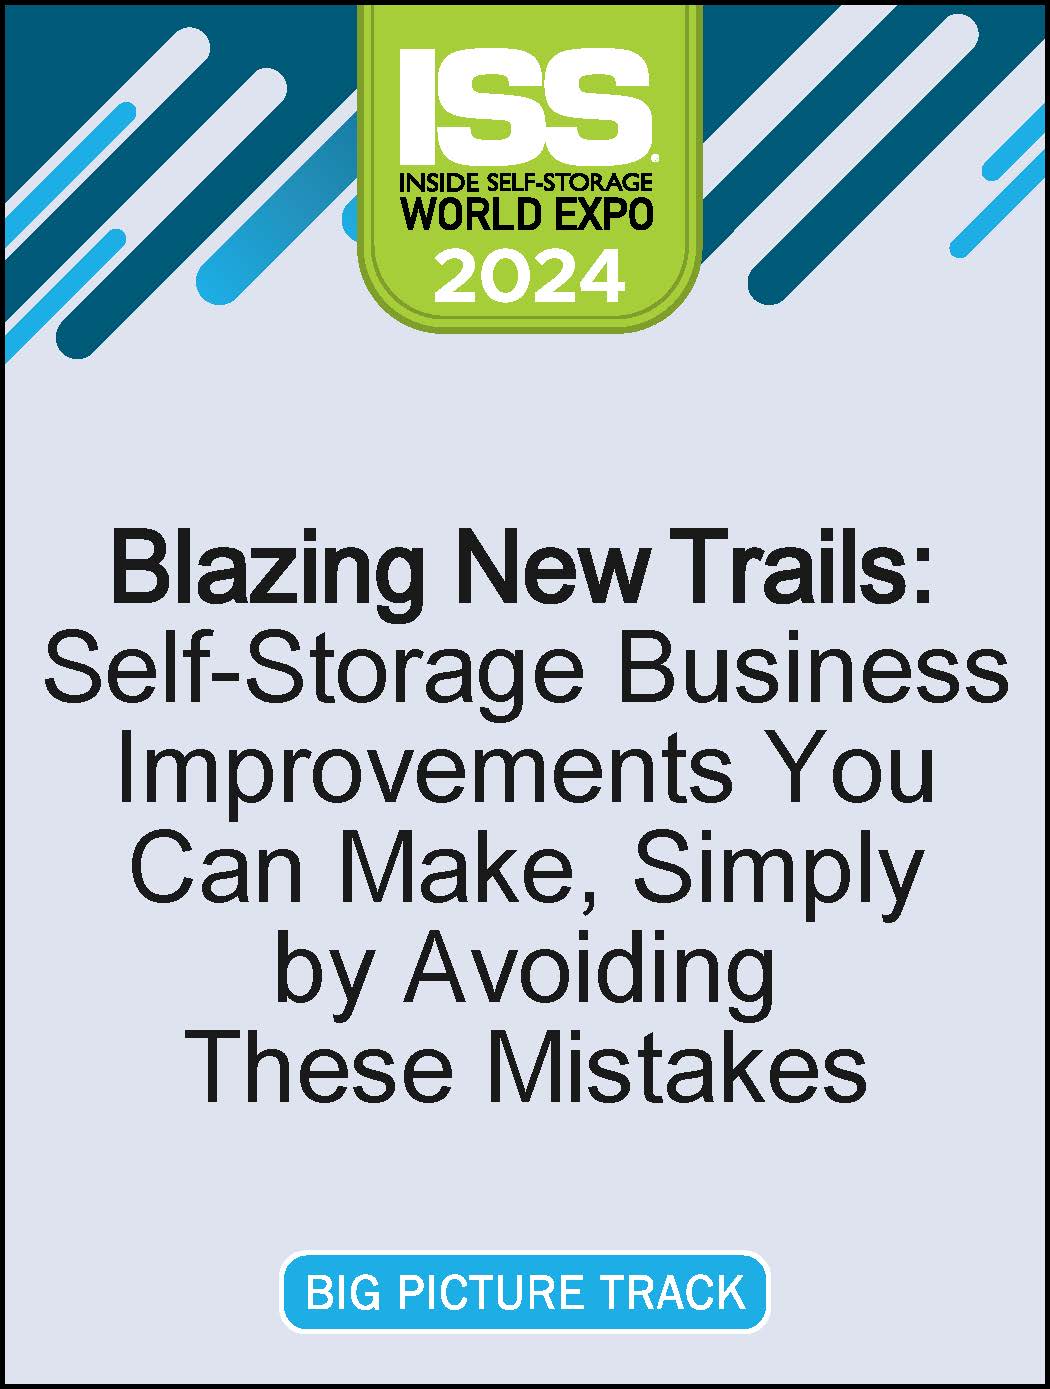 Video Pre-Order - Blazing New Trails: Self-Storage Business Improvements You Can Make, Simply by Avoiding These Mistakes